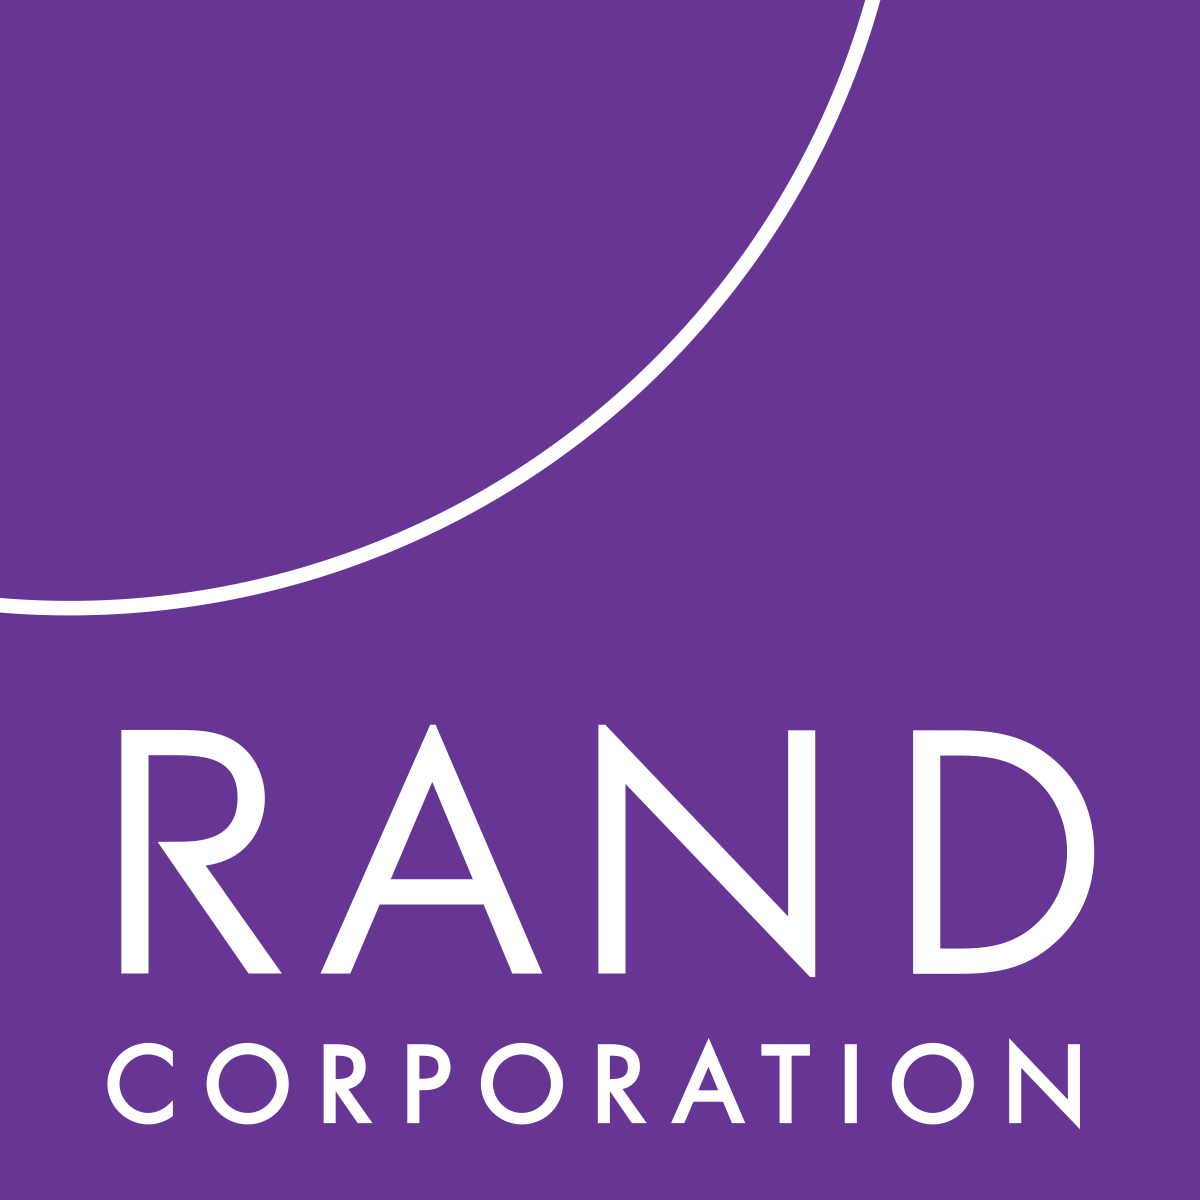 Abd W Logo - RAND Corporation Provides Objective Research Services and Public